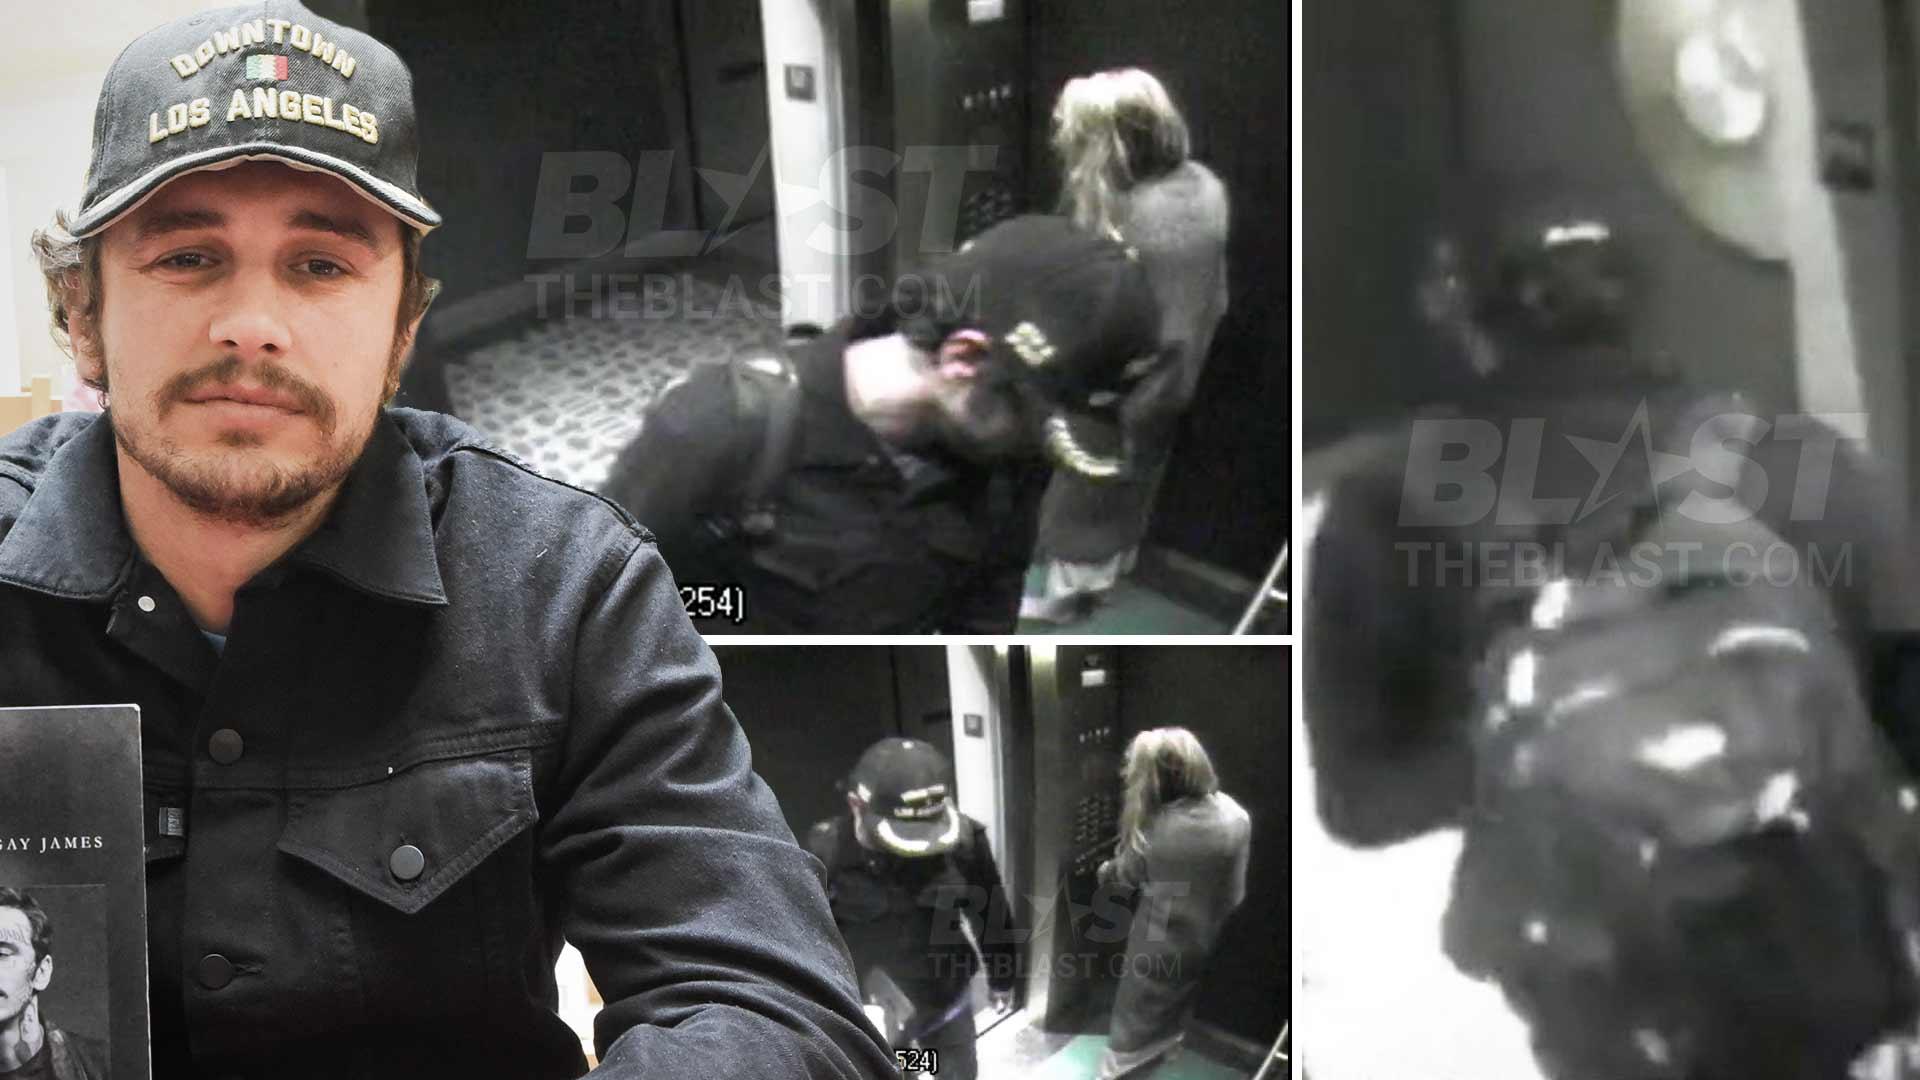 Surveillance Video Shows James Franco With Amber Heard One Day After Blowout Fight With Johnny Depp